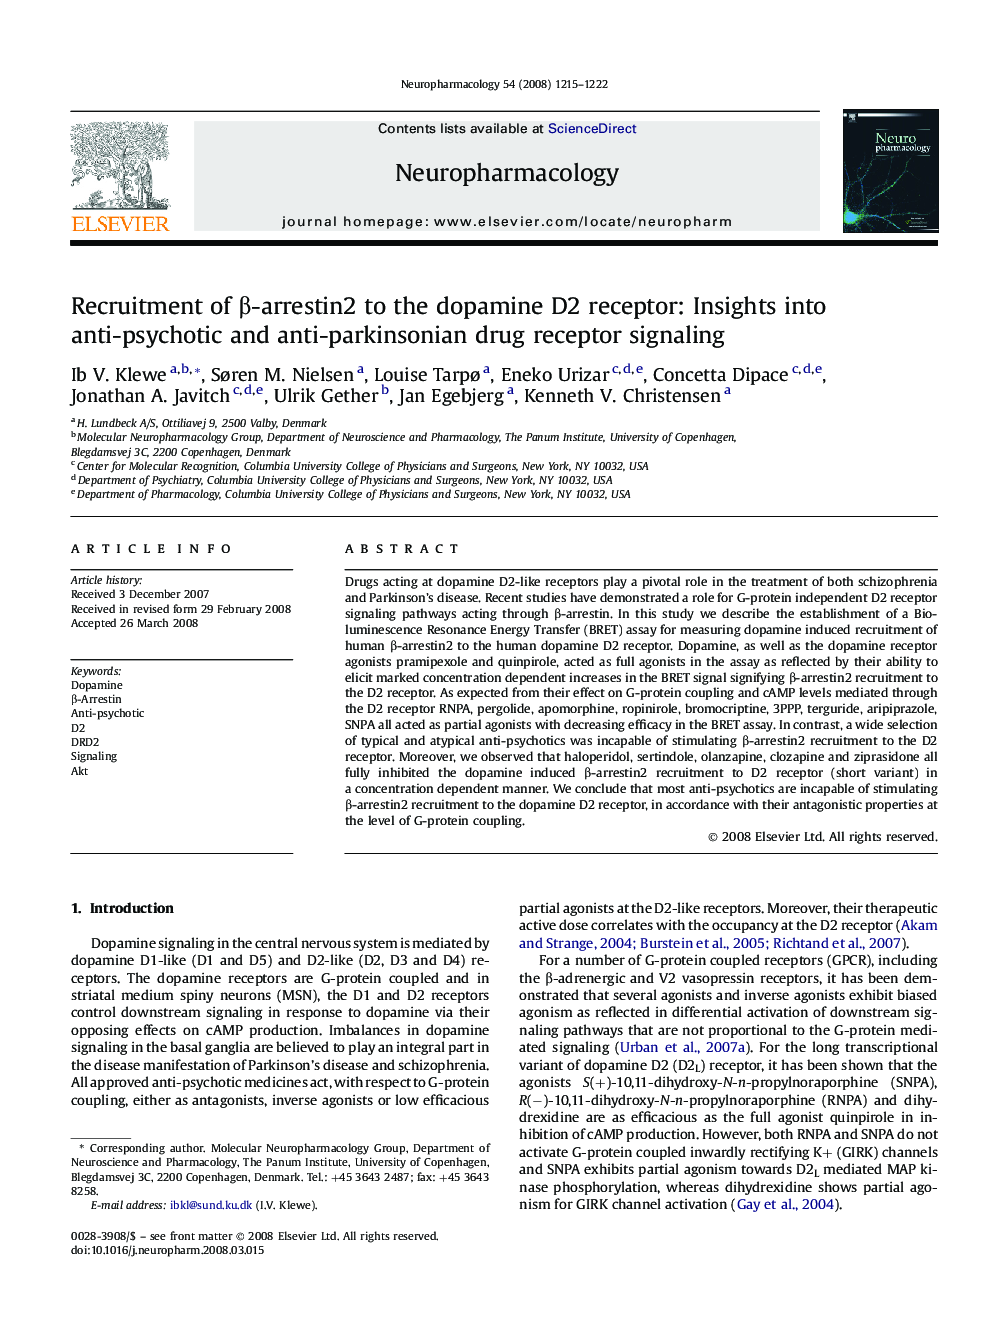 Recruitment of β-arrestin2 to the dopamine D2 receptor: Insights into anti-psychotic and anti-parkinsonian drug receptor signaling